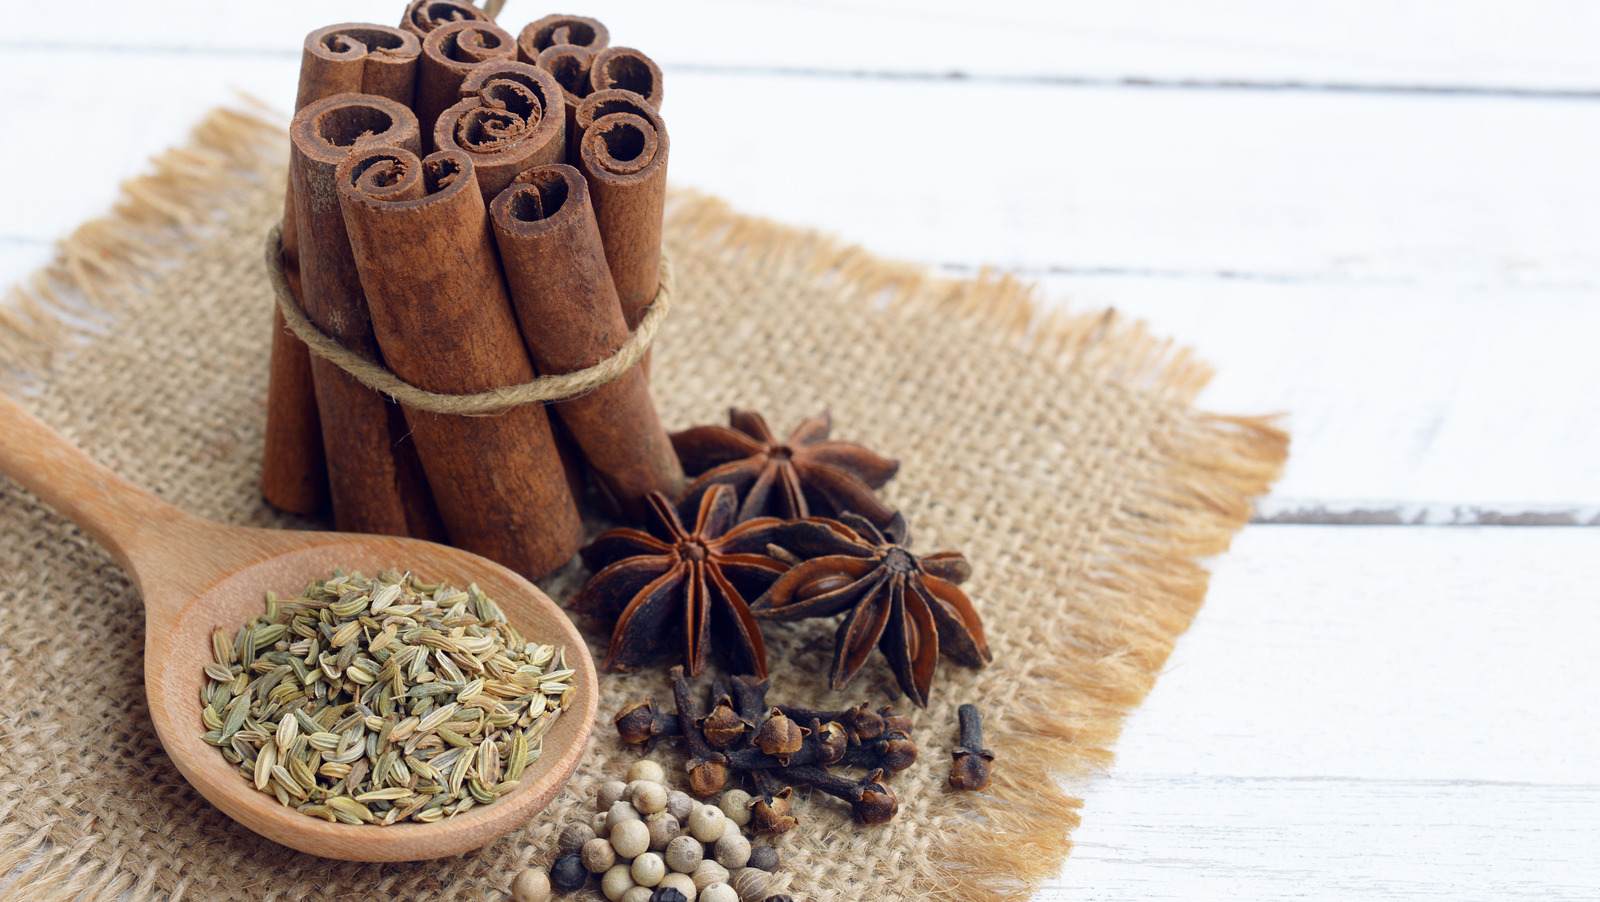 Homemade Chinese 5 Spice Mix Recipe (and balance of the 5 elements